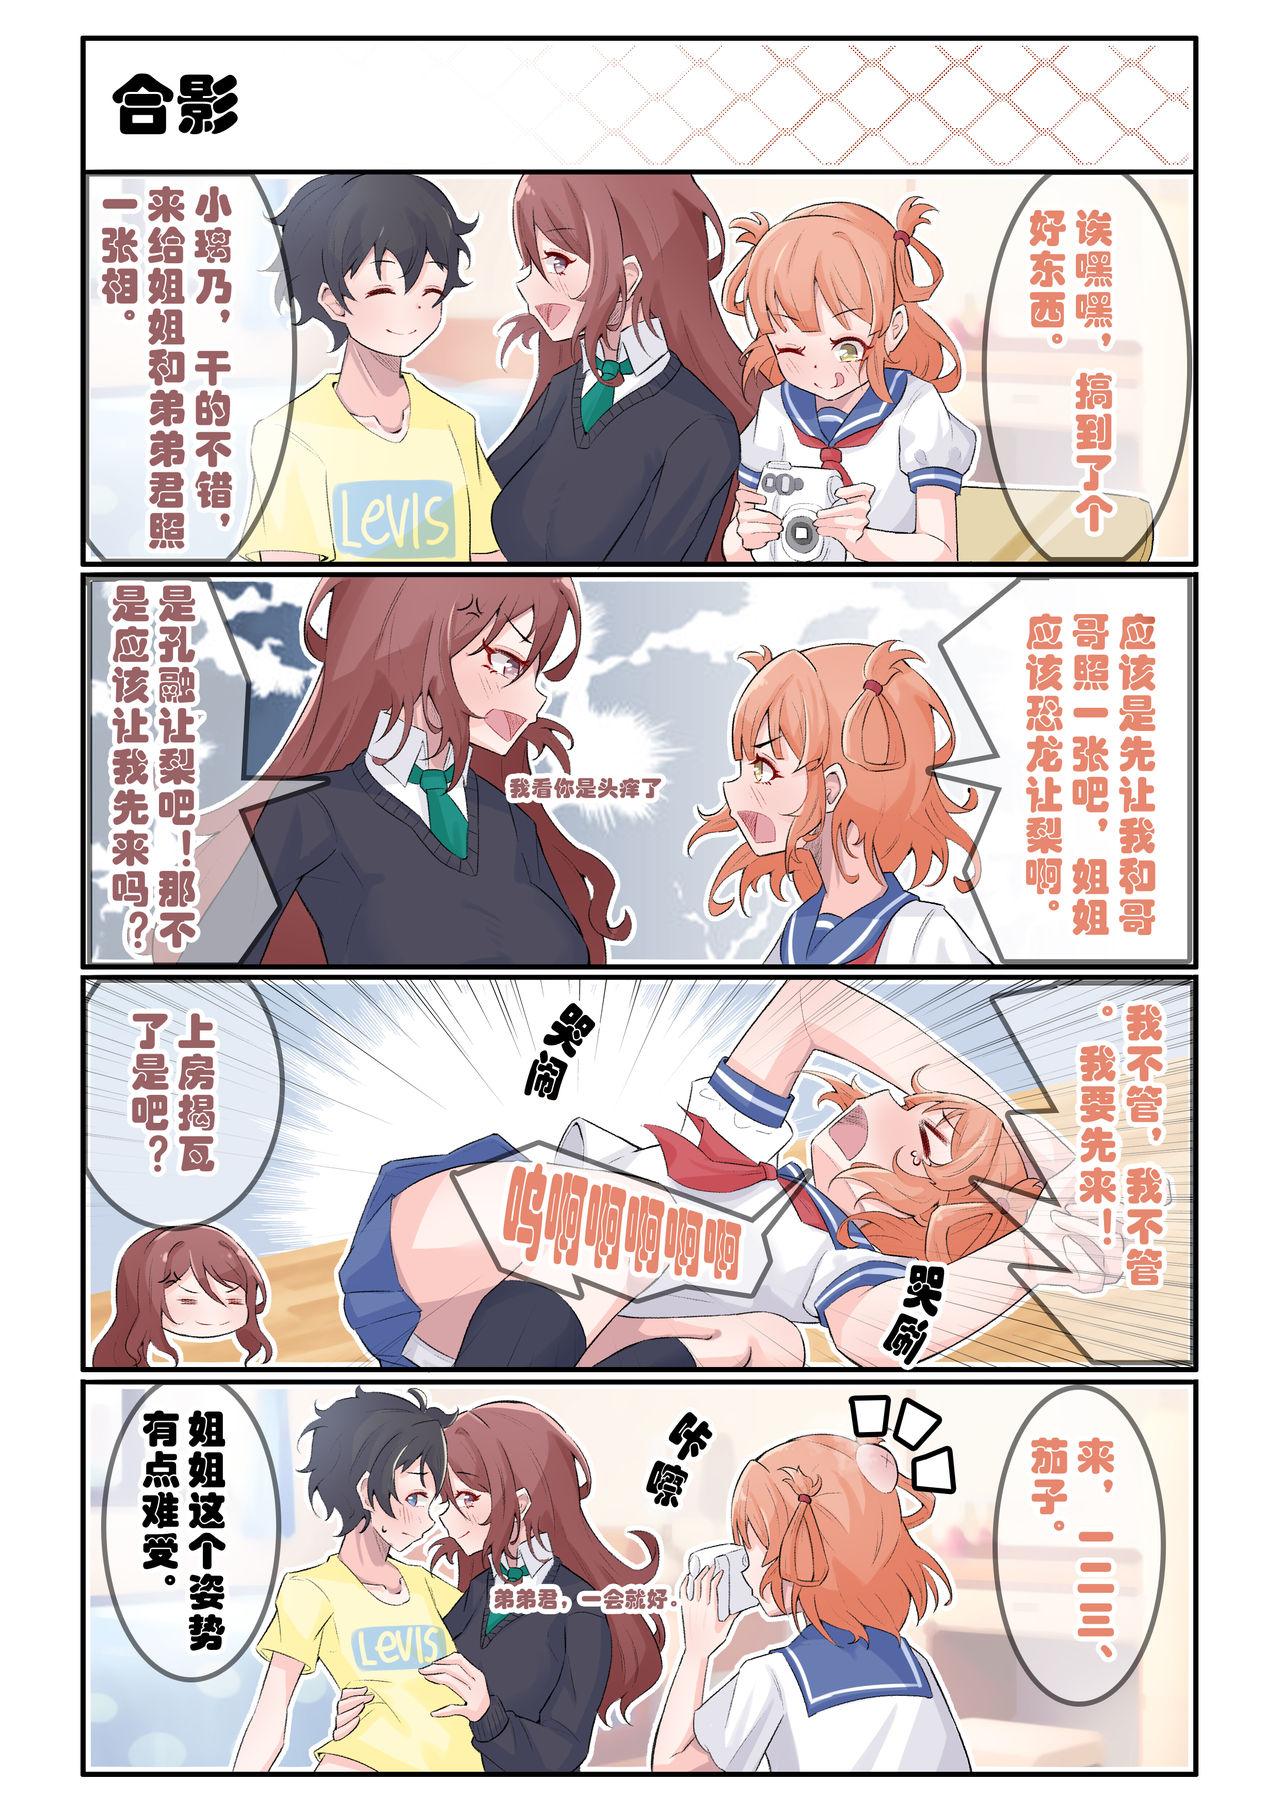 Full 佑树的枯燥生活 - Princess connect Gay Longhair - Page 5